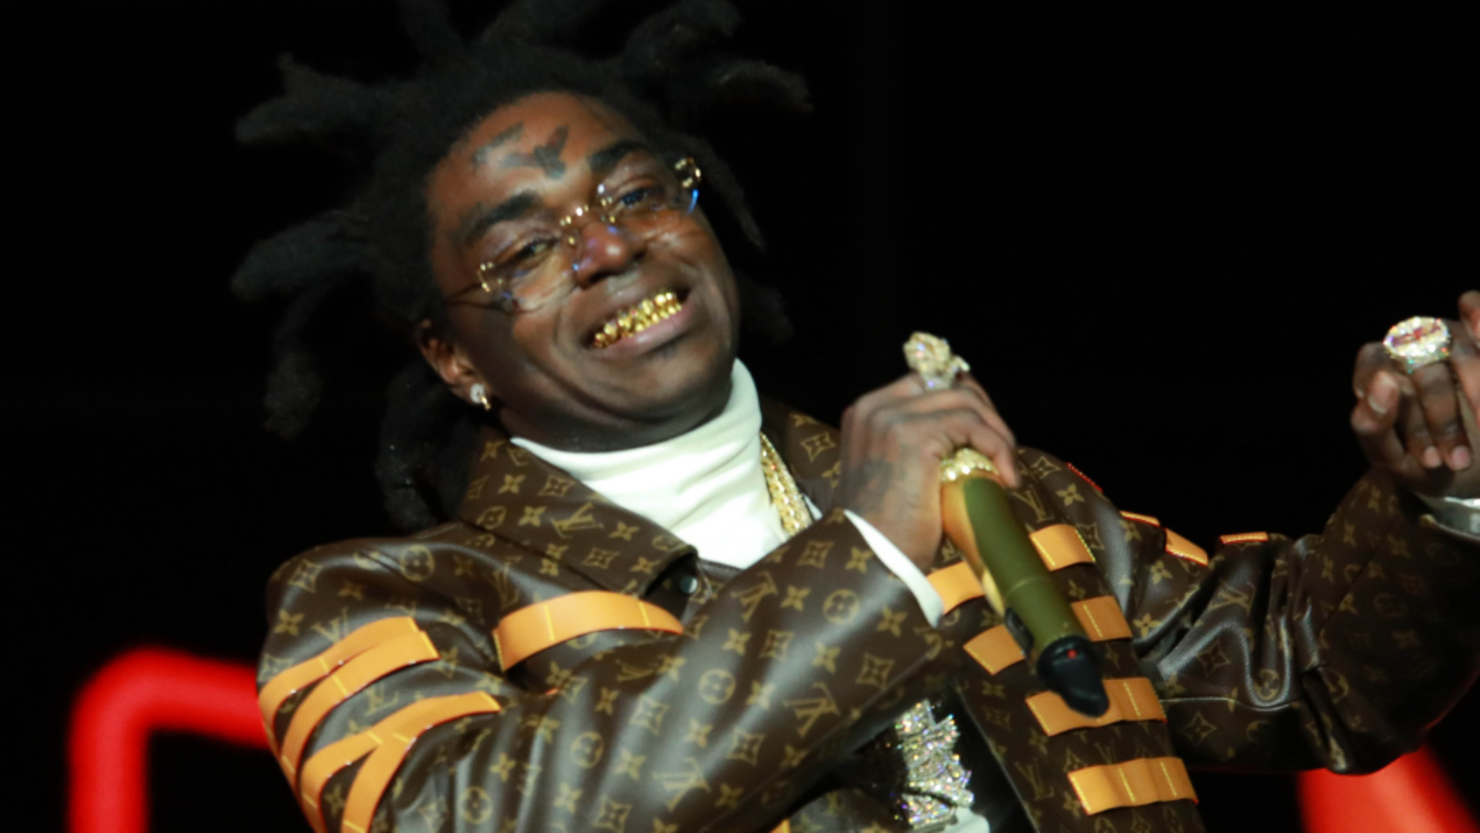 Kodak Black Completes 90-Day Rehab Stint And Is Now 'Clean And Sober